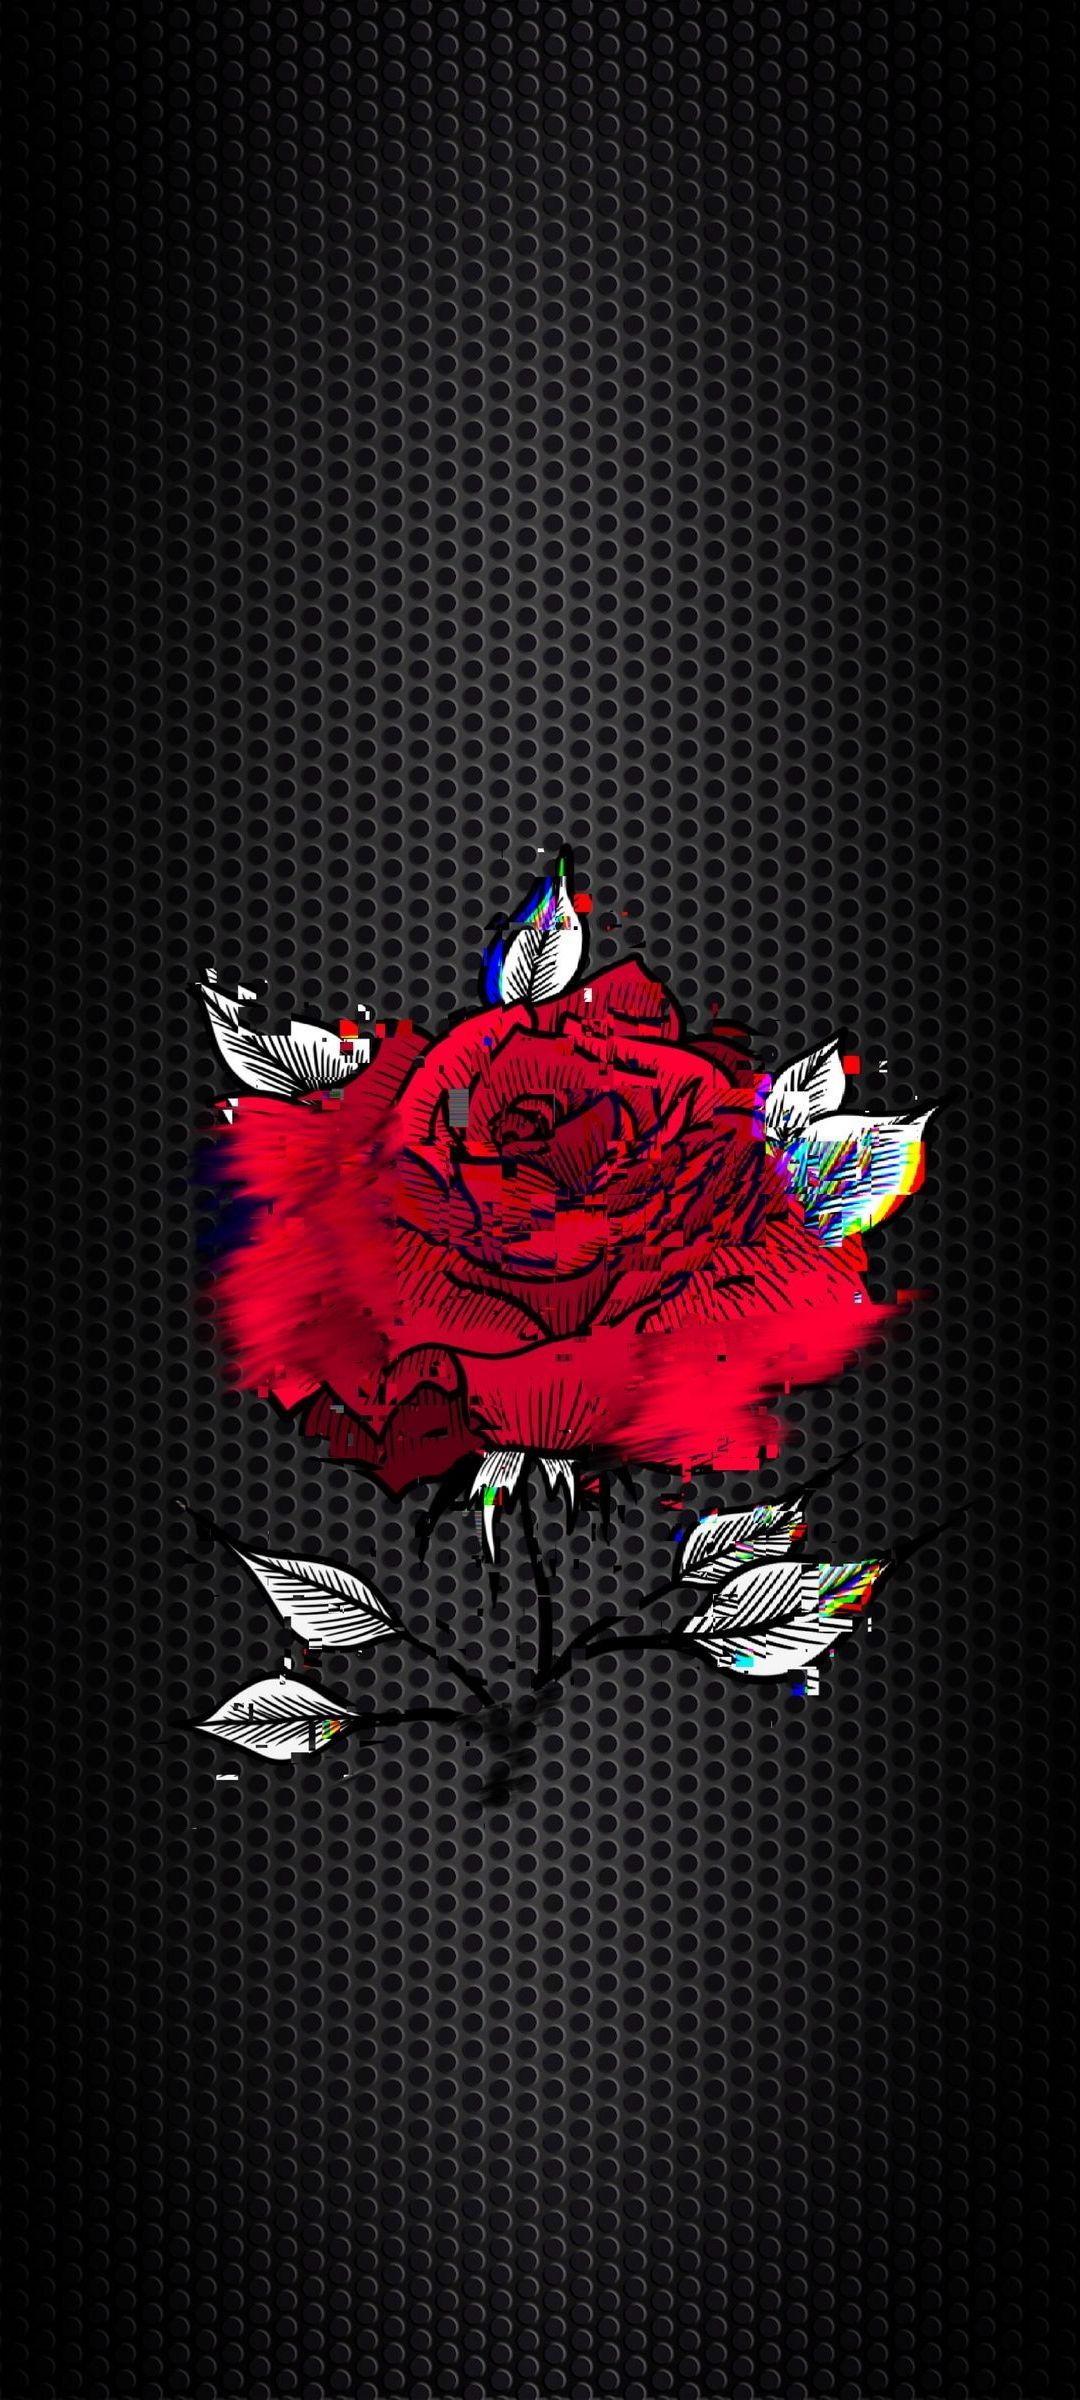 A rose with leaves and petals on the screen - Dark red, roses